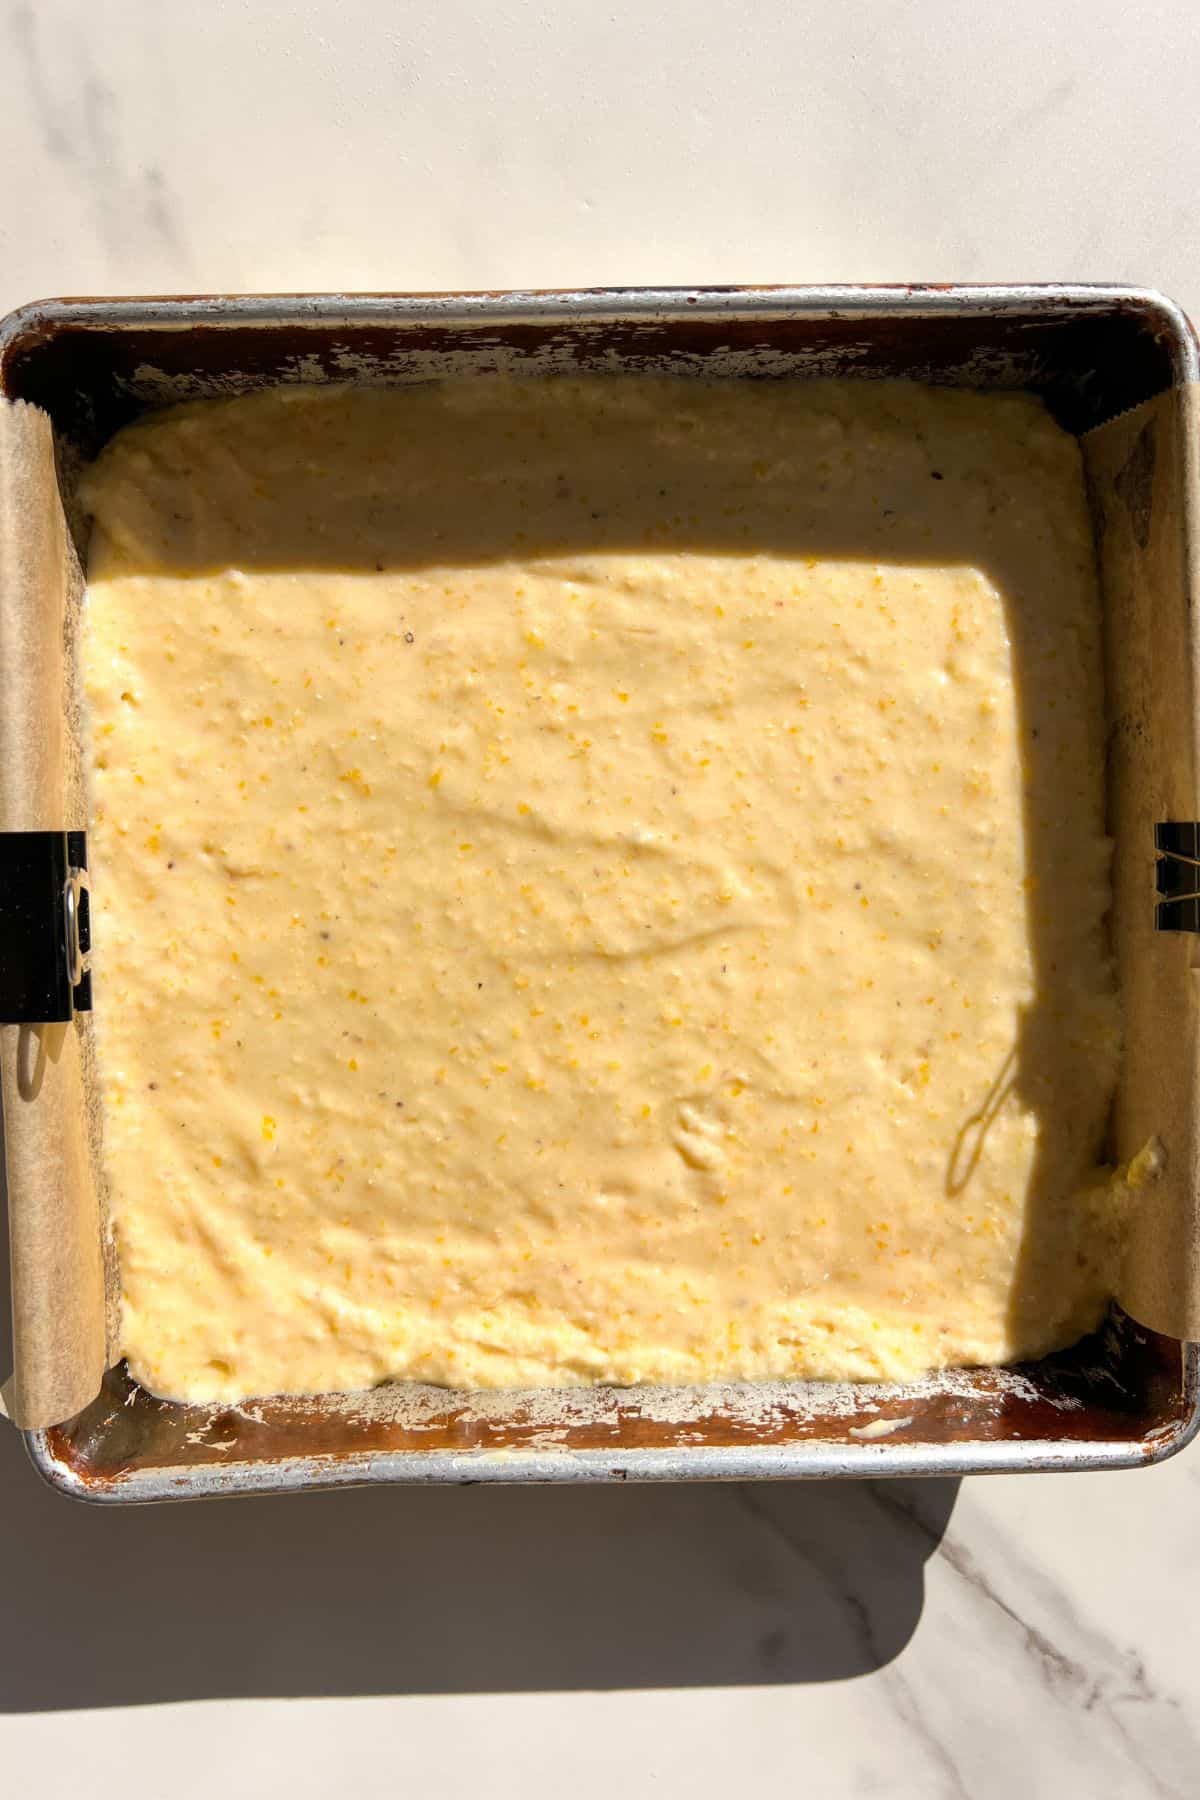 Gluten-free cornbread batter to an 8x8 square pan lined with parchment paper.